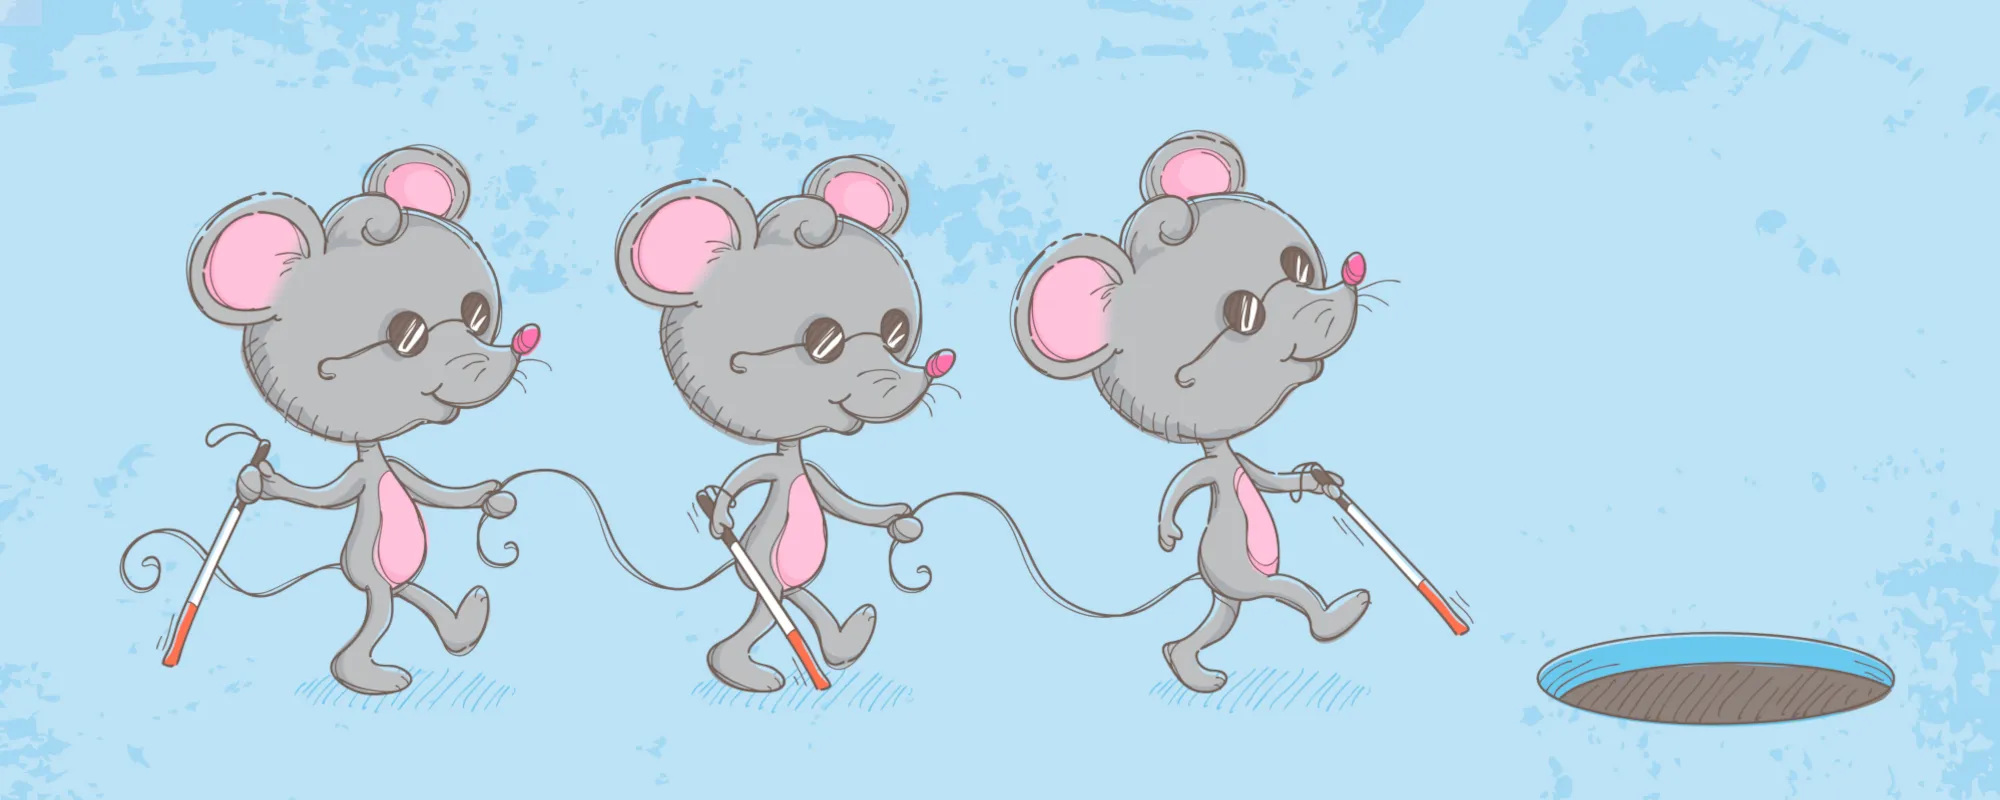 Behind the Meaning and History of the Nursery Rhyme “Three Blind Mice”